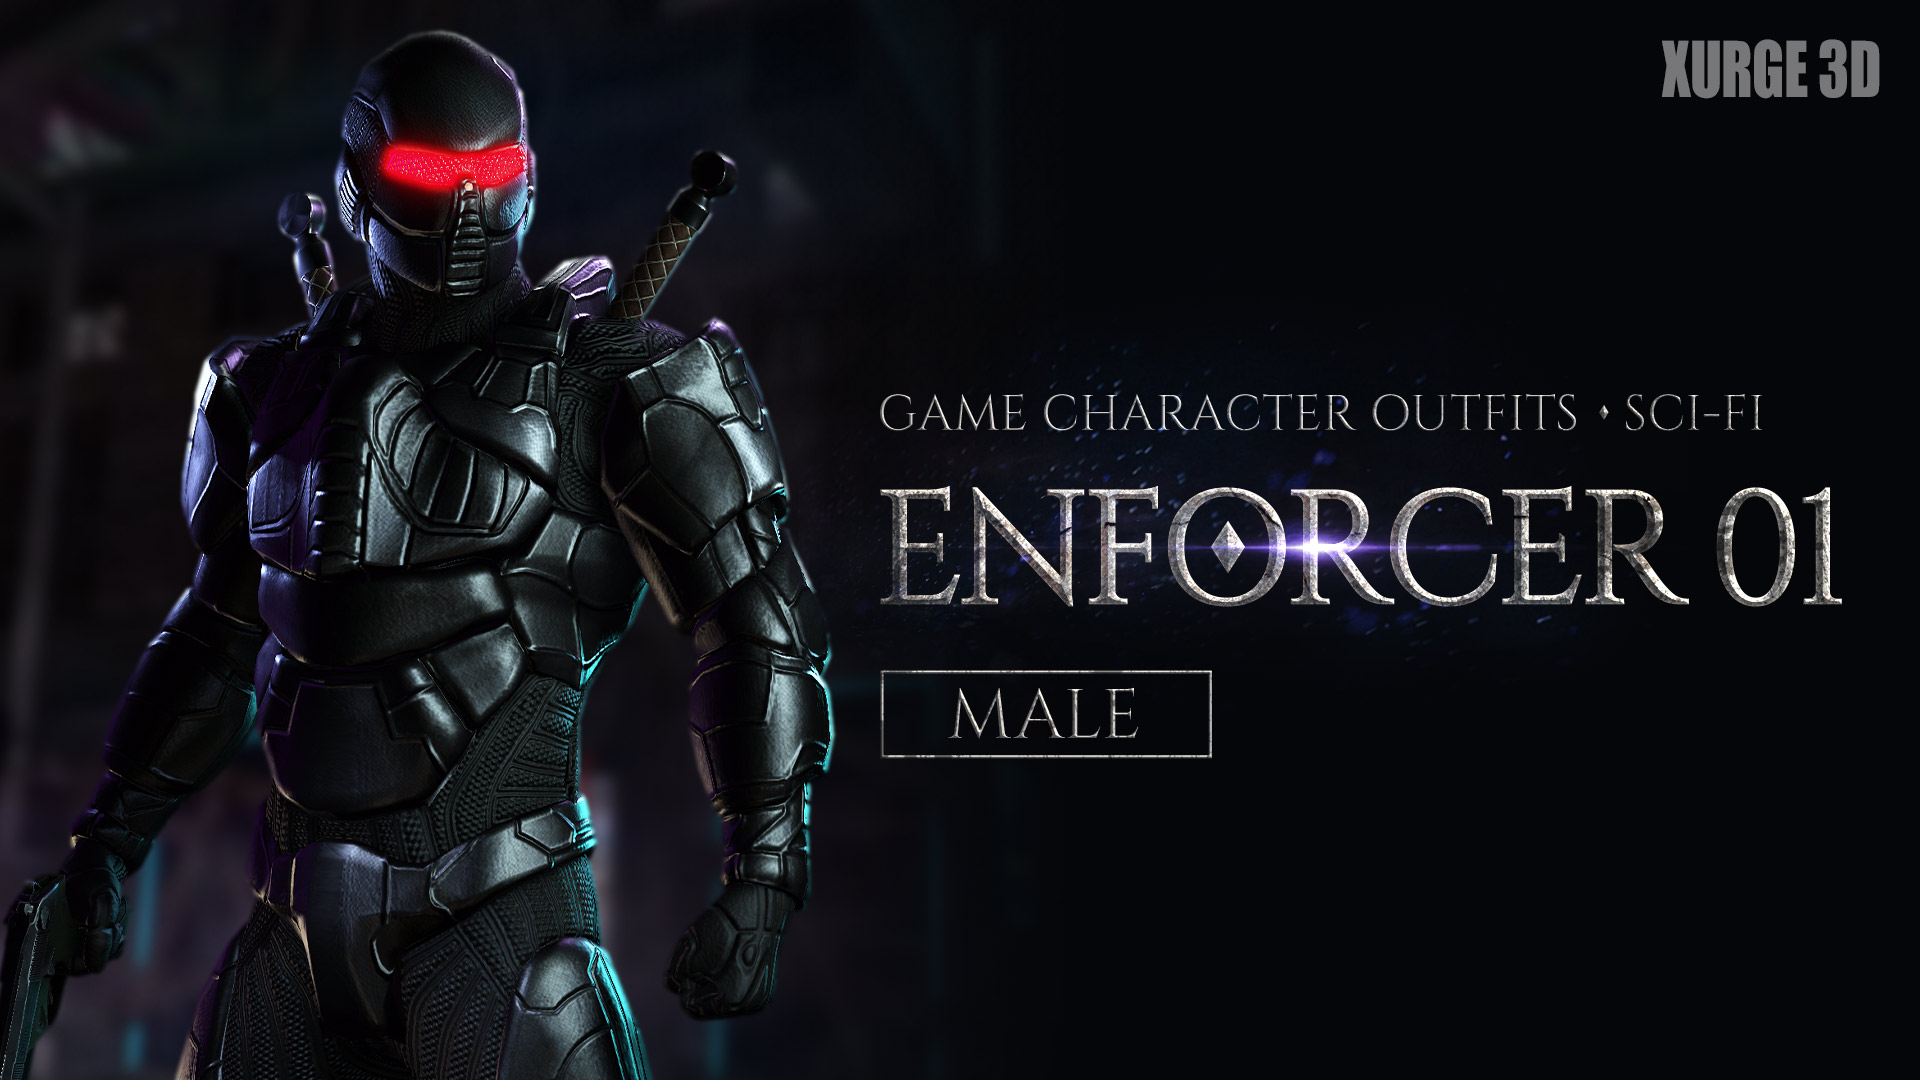 Enforcer 01 Armor Male (Reallusion)